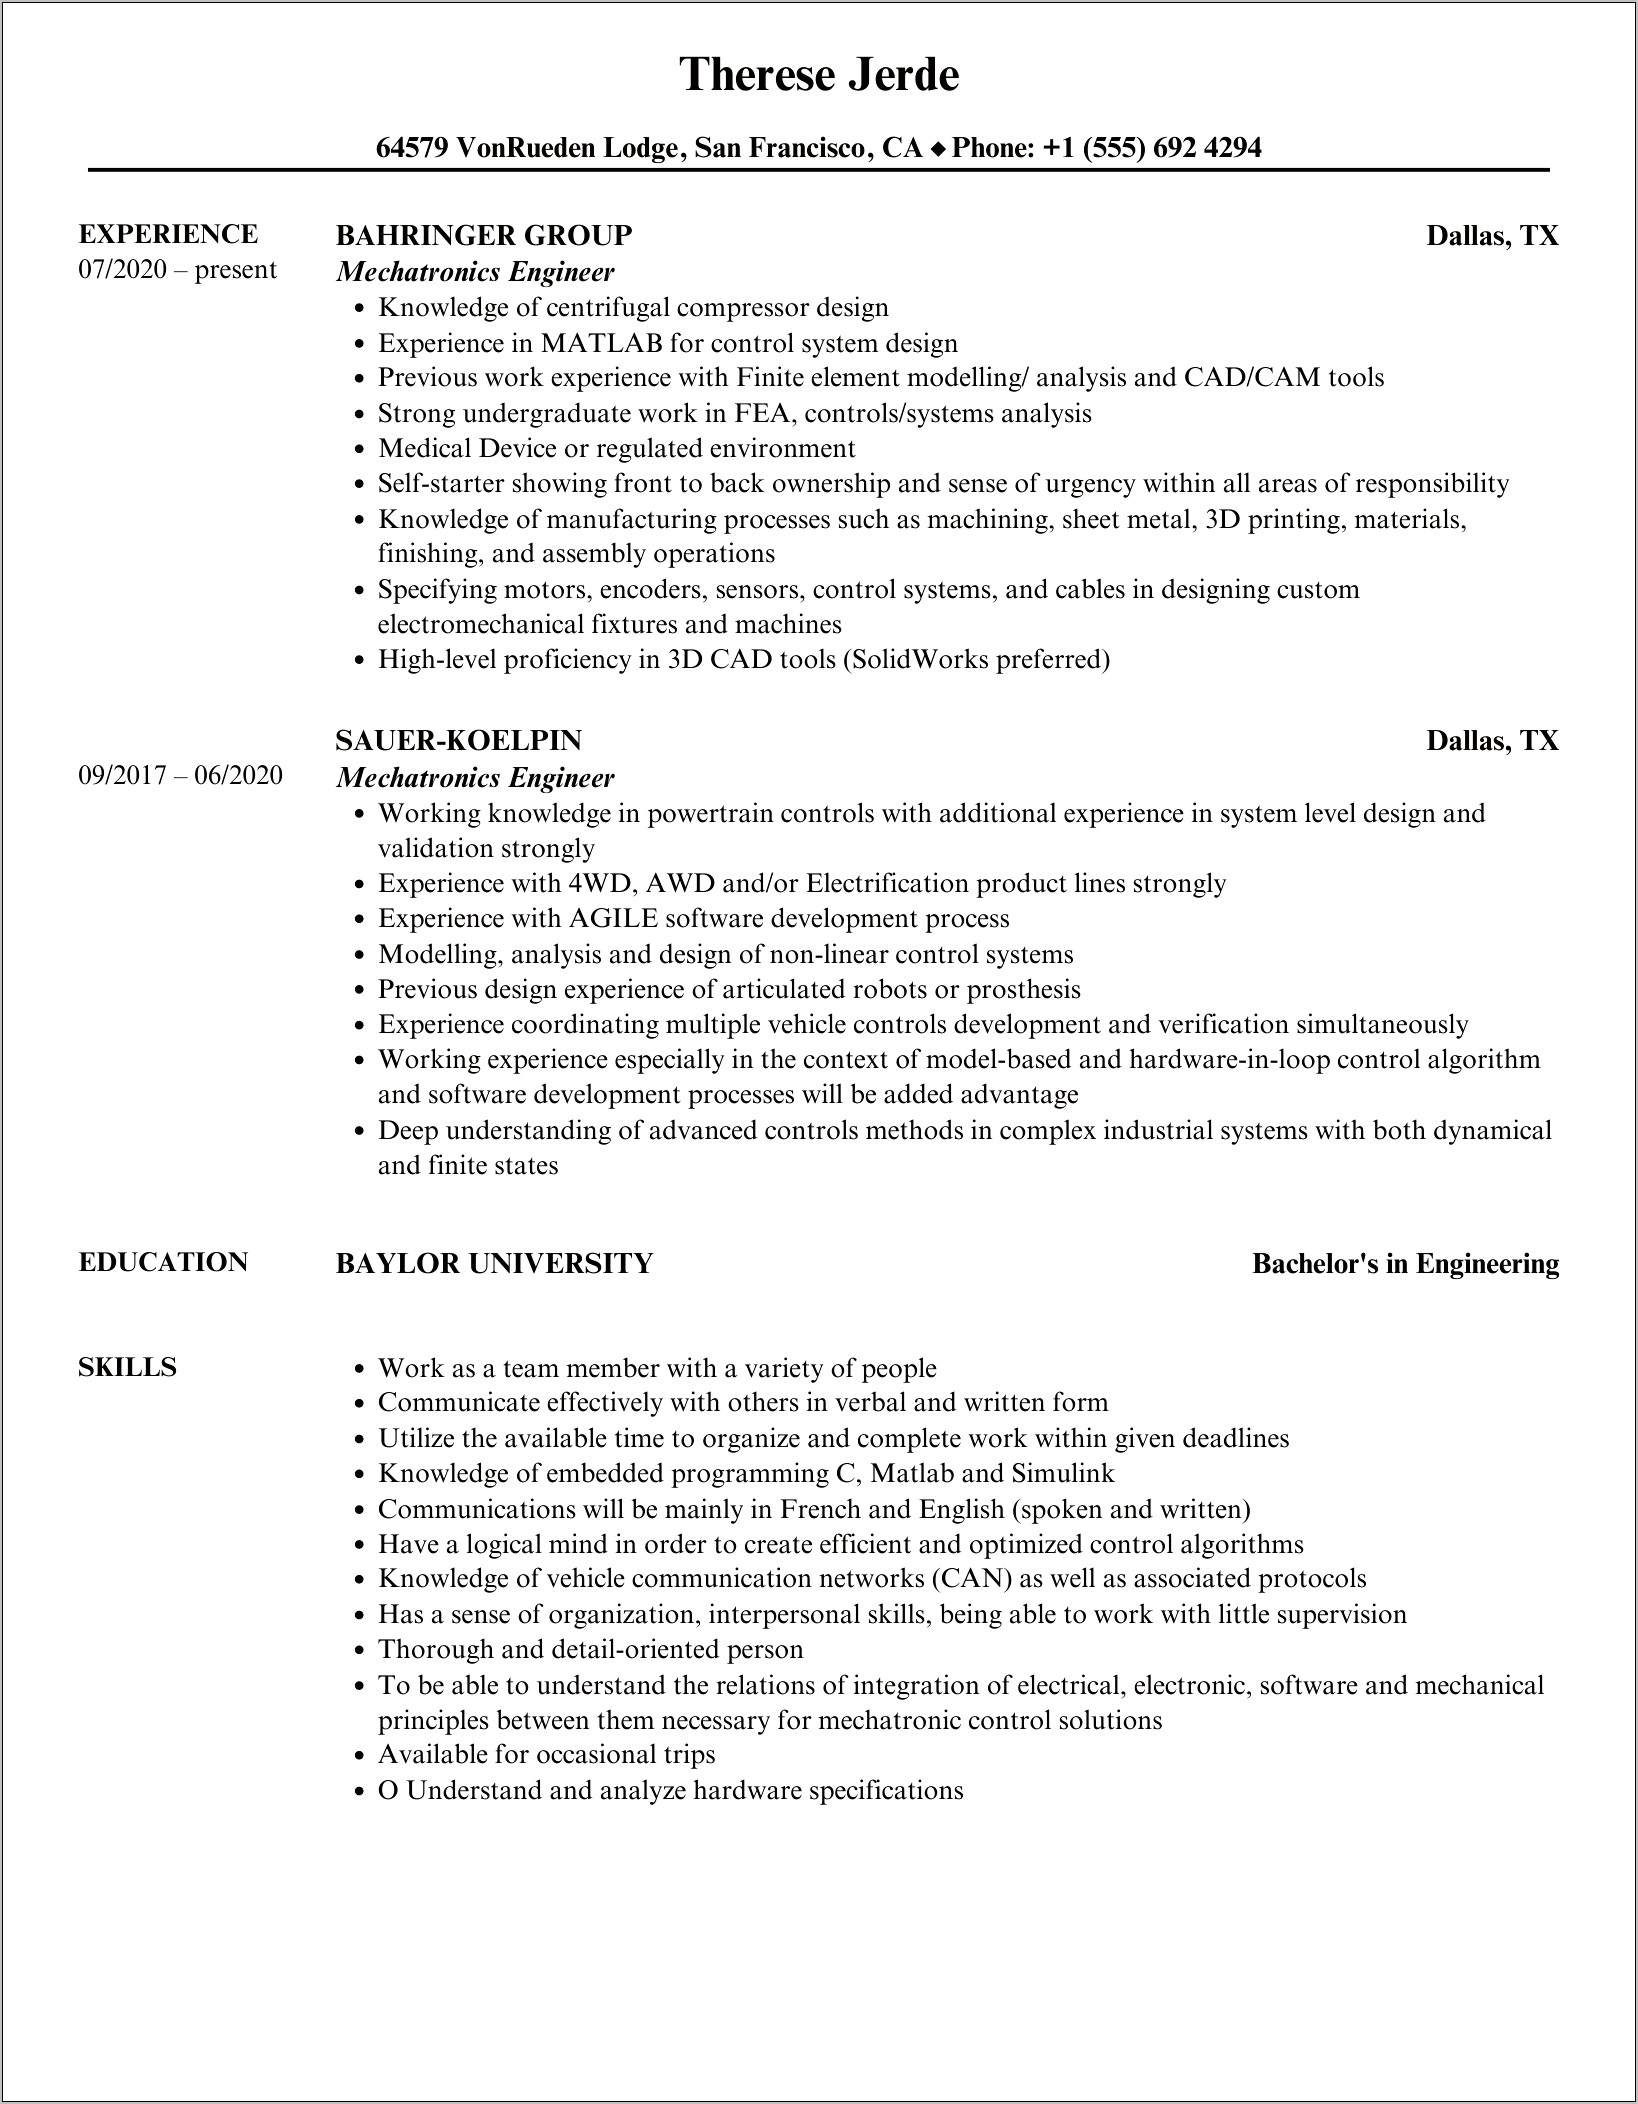 Resume Objective Example For Mechatronics